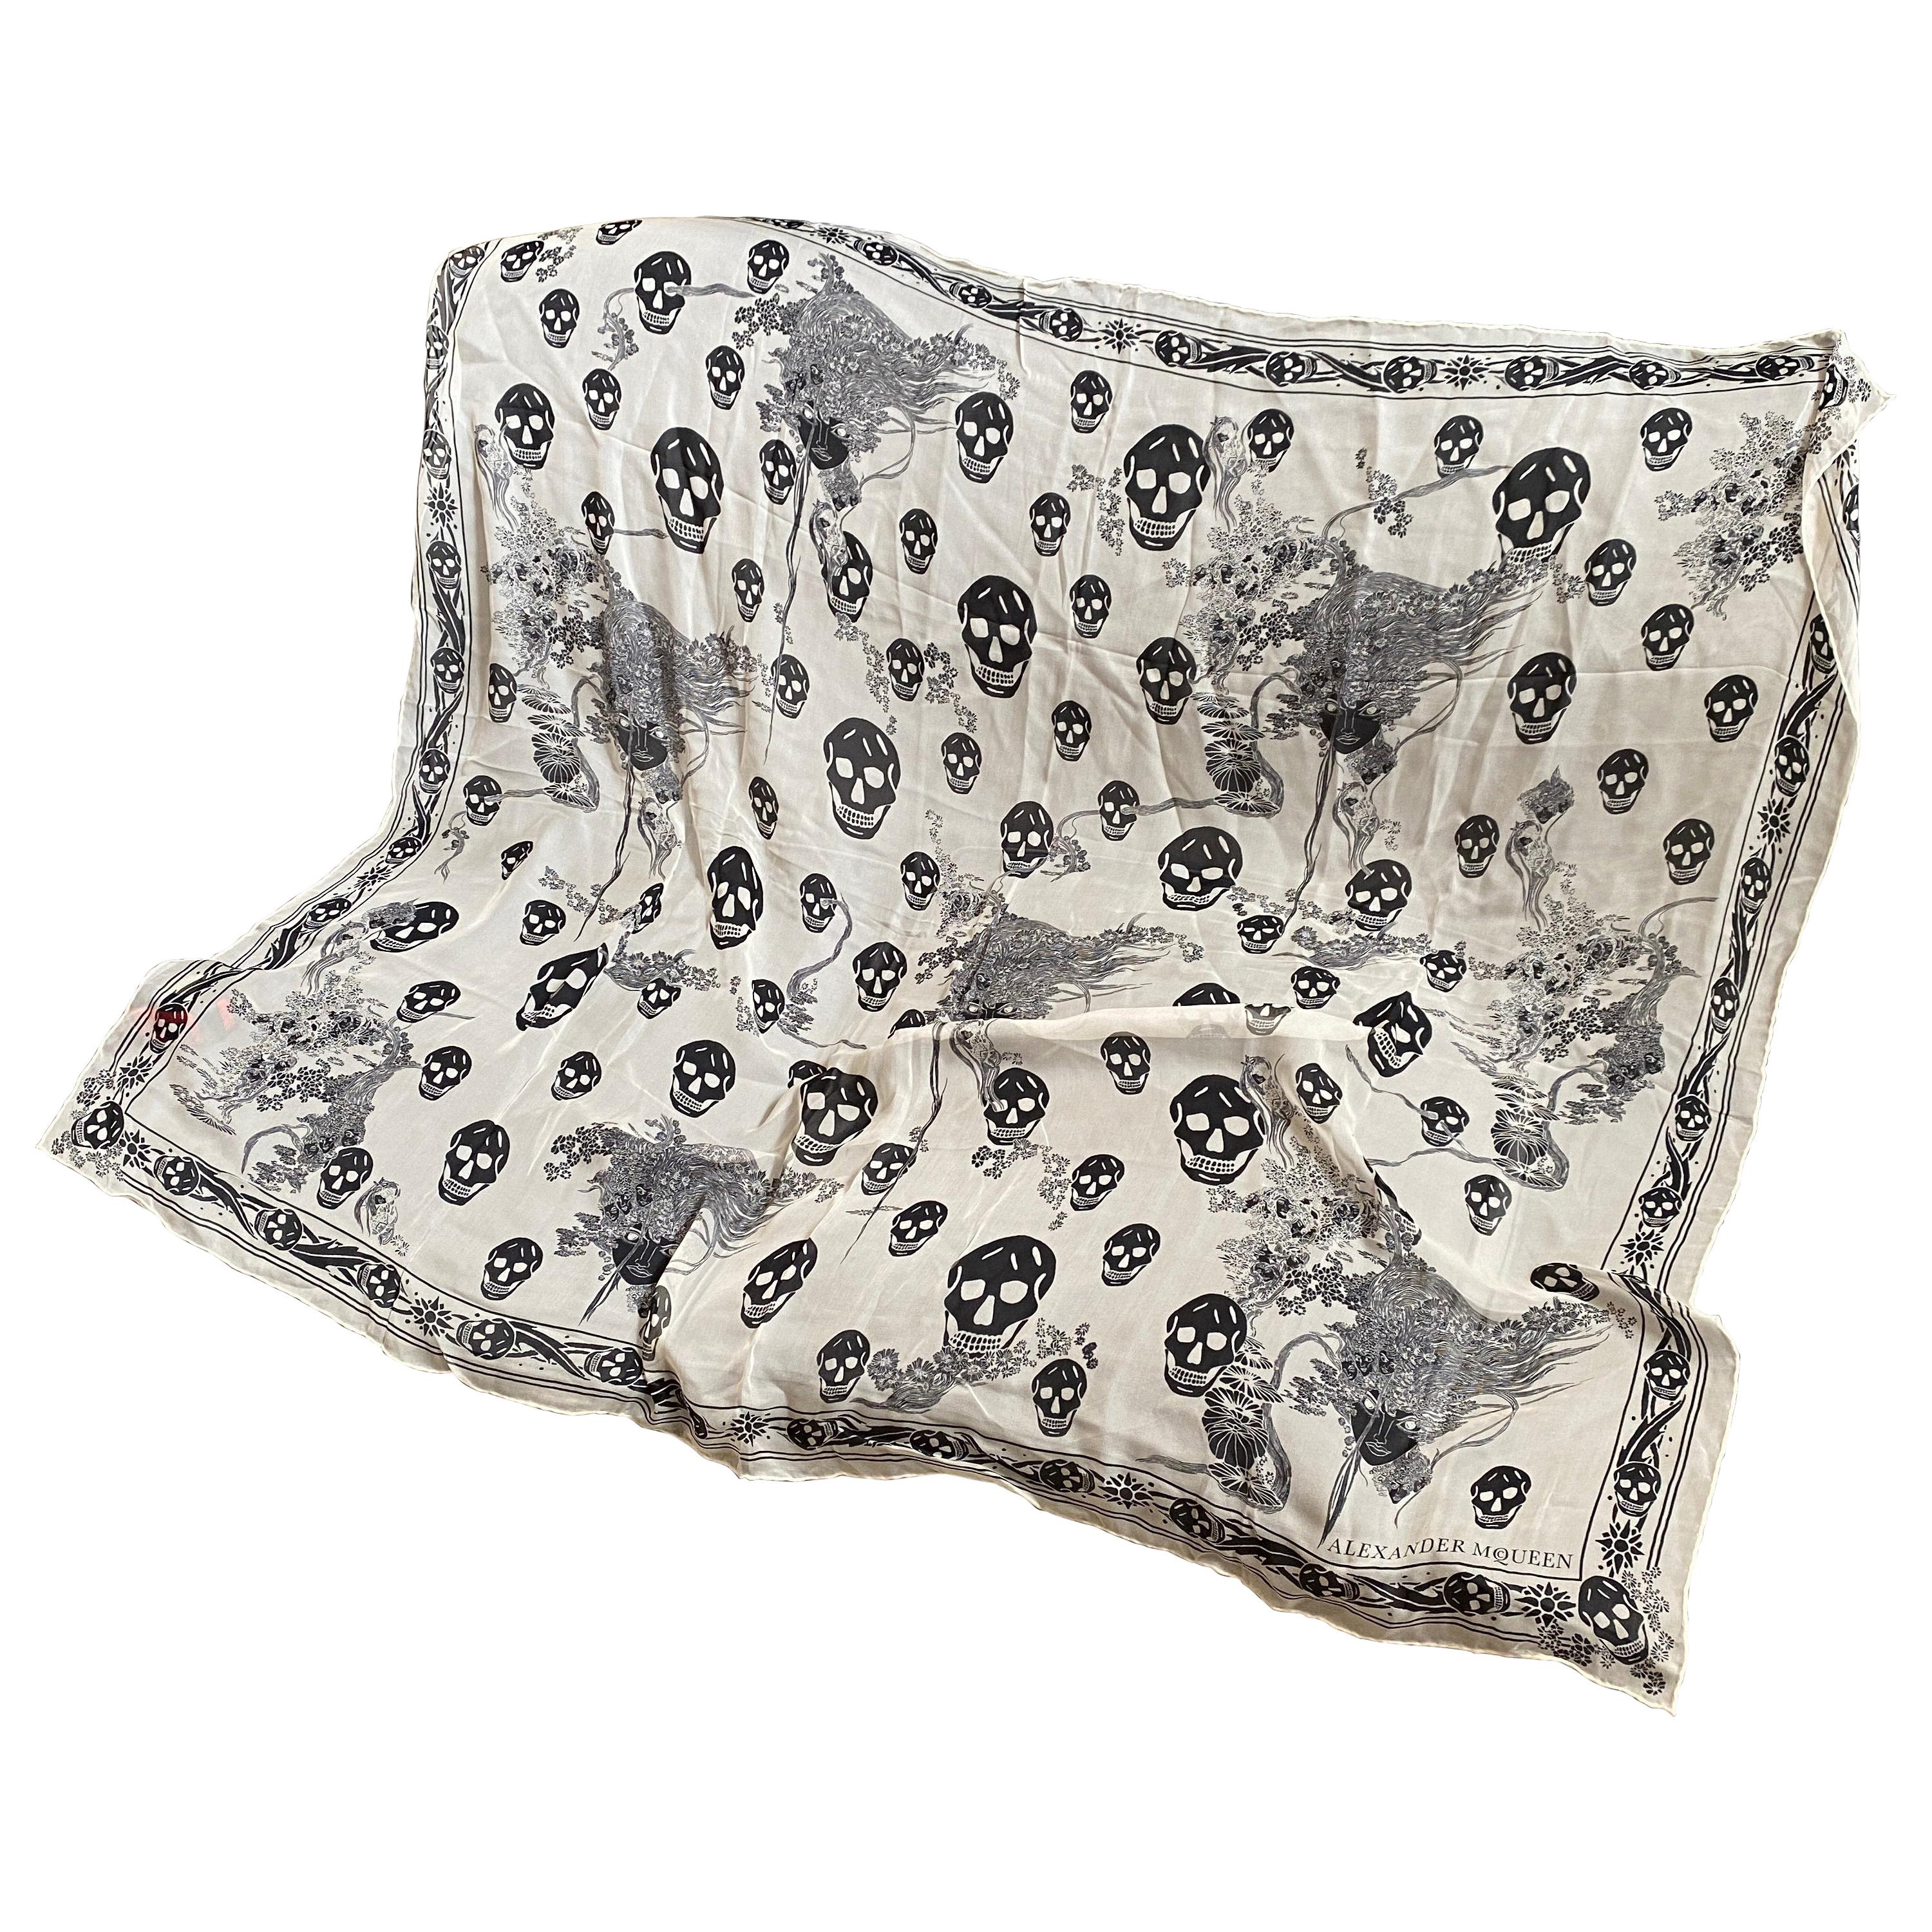 An Iconic Alexander McQueen Black and white Skulls  Silk Scarf